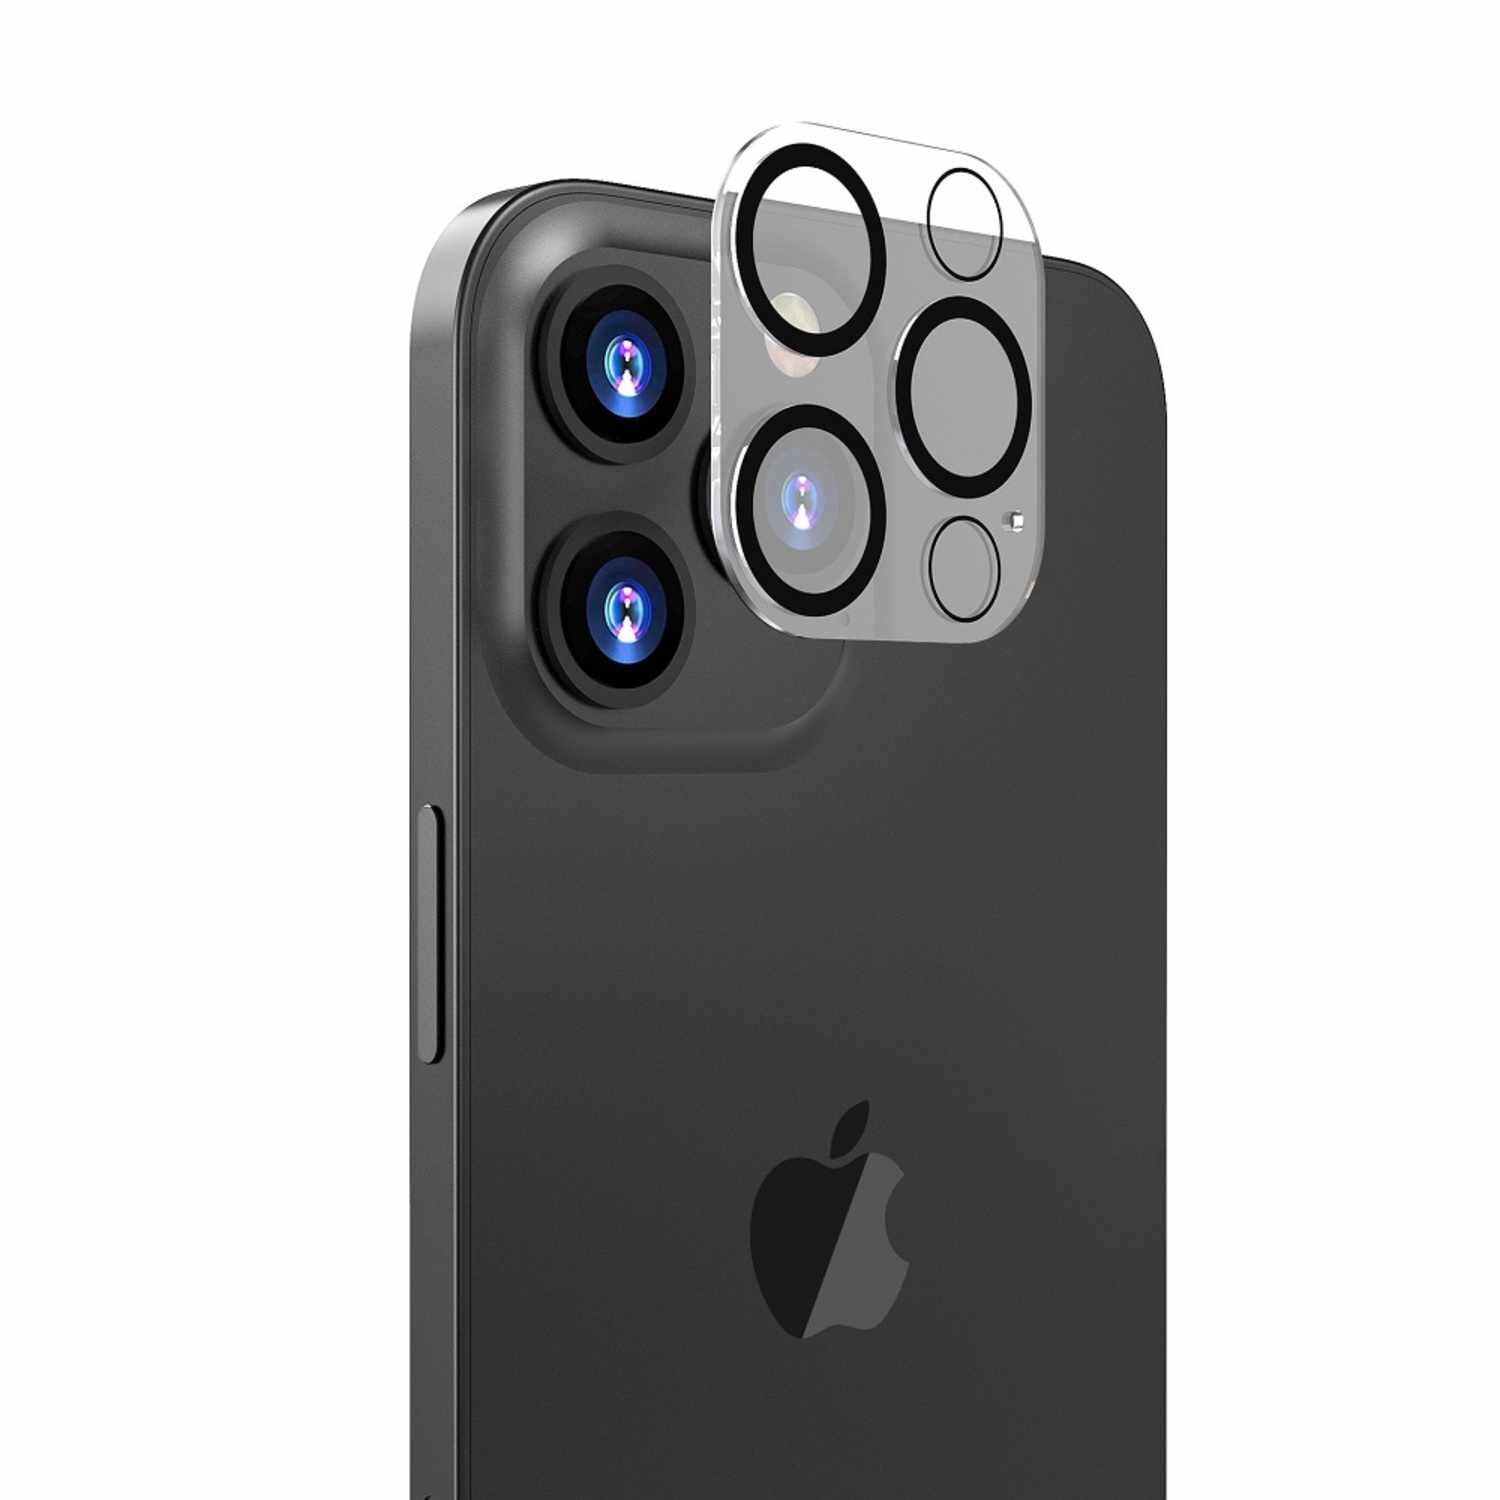 Camera Lens Protector for iPhone 12